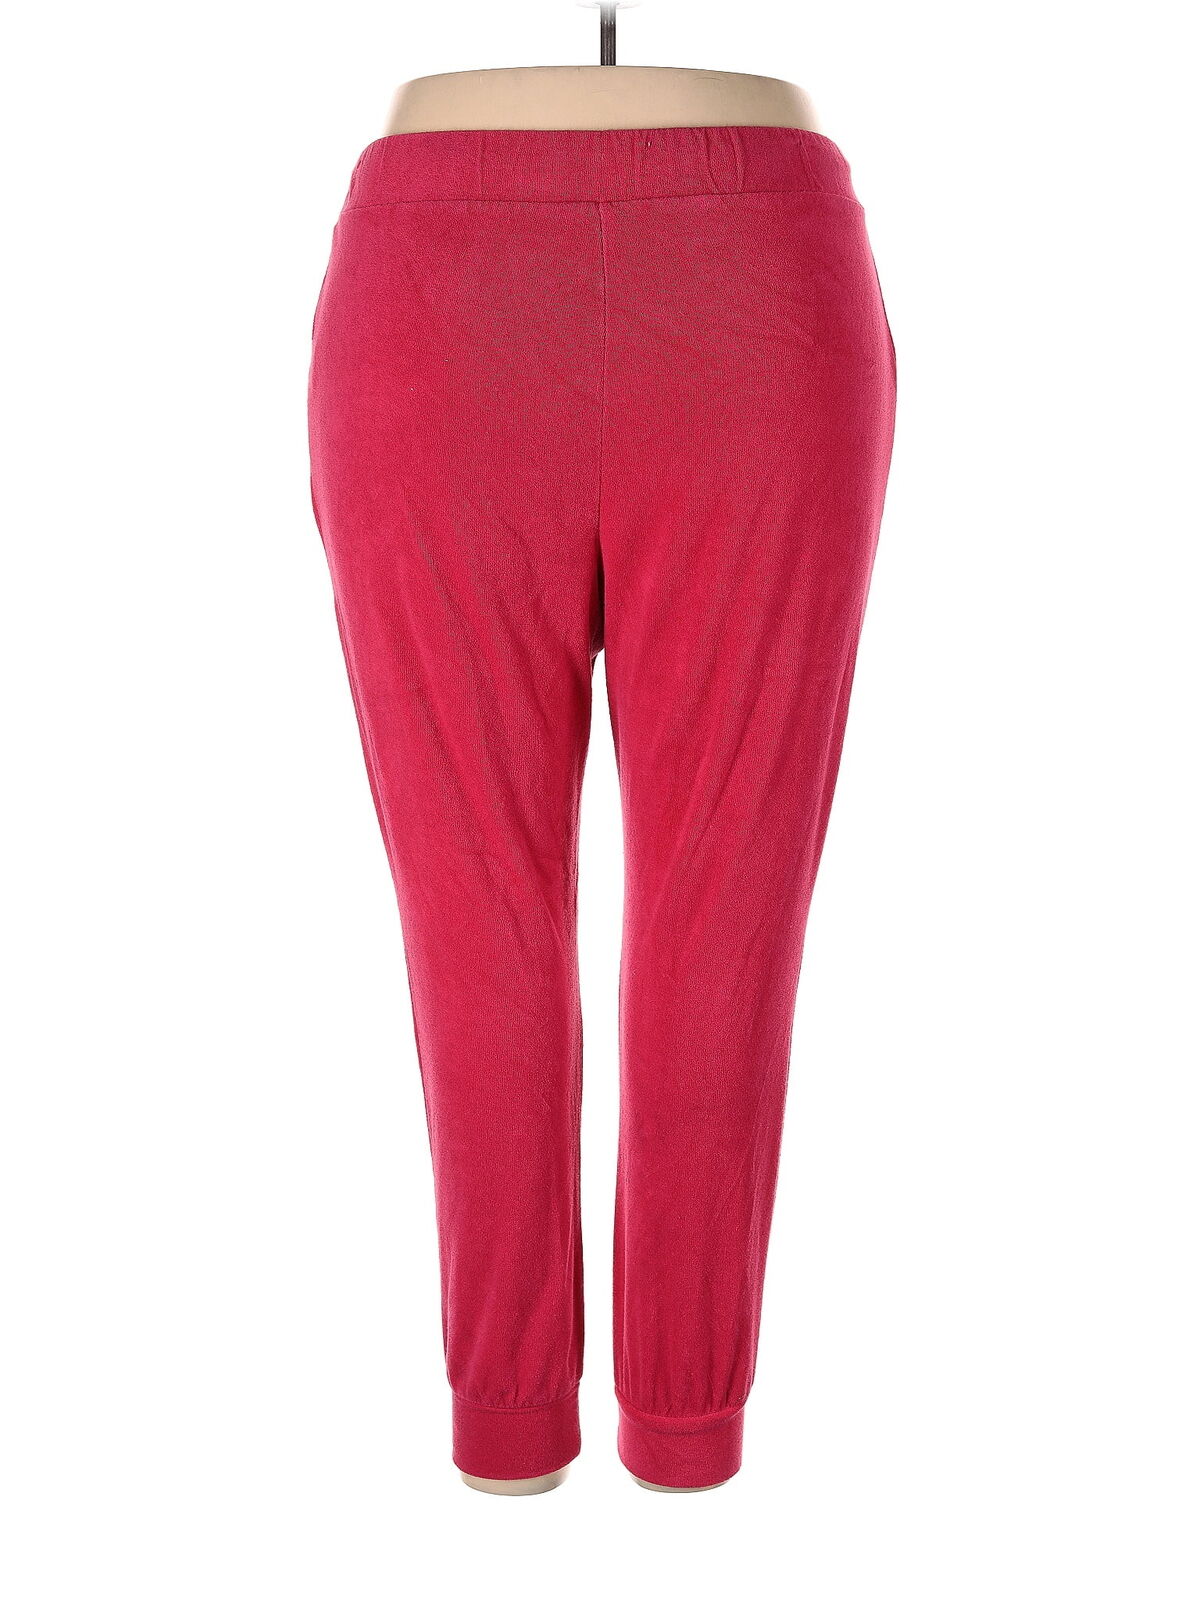 Juicy by Juicy Couture Women Red Sweatpants XXL - image 2